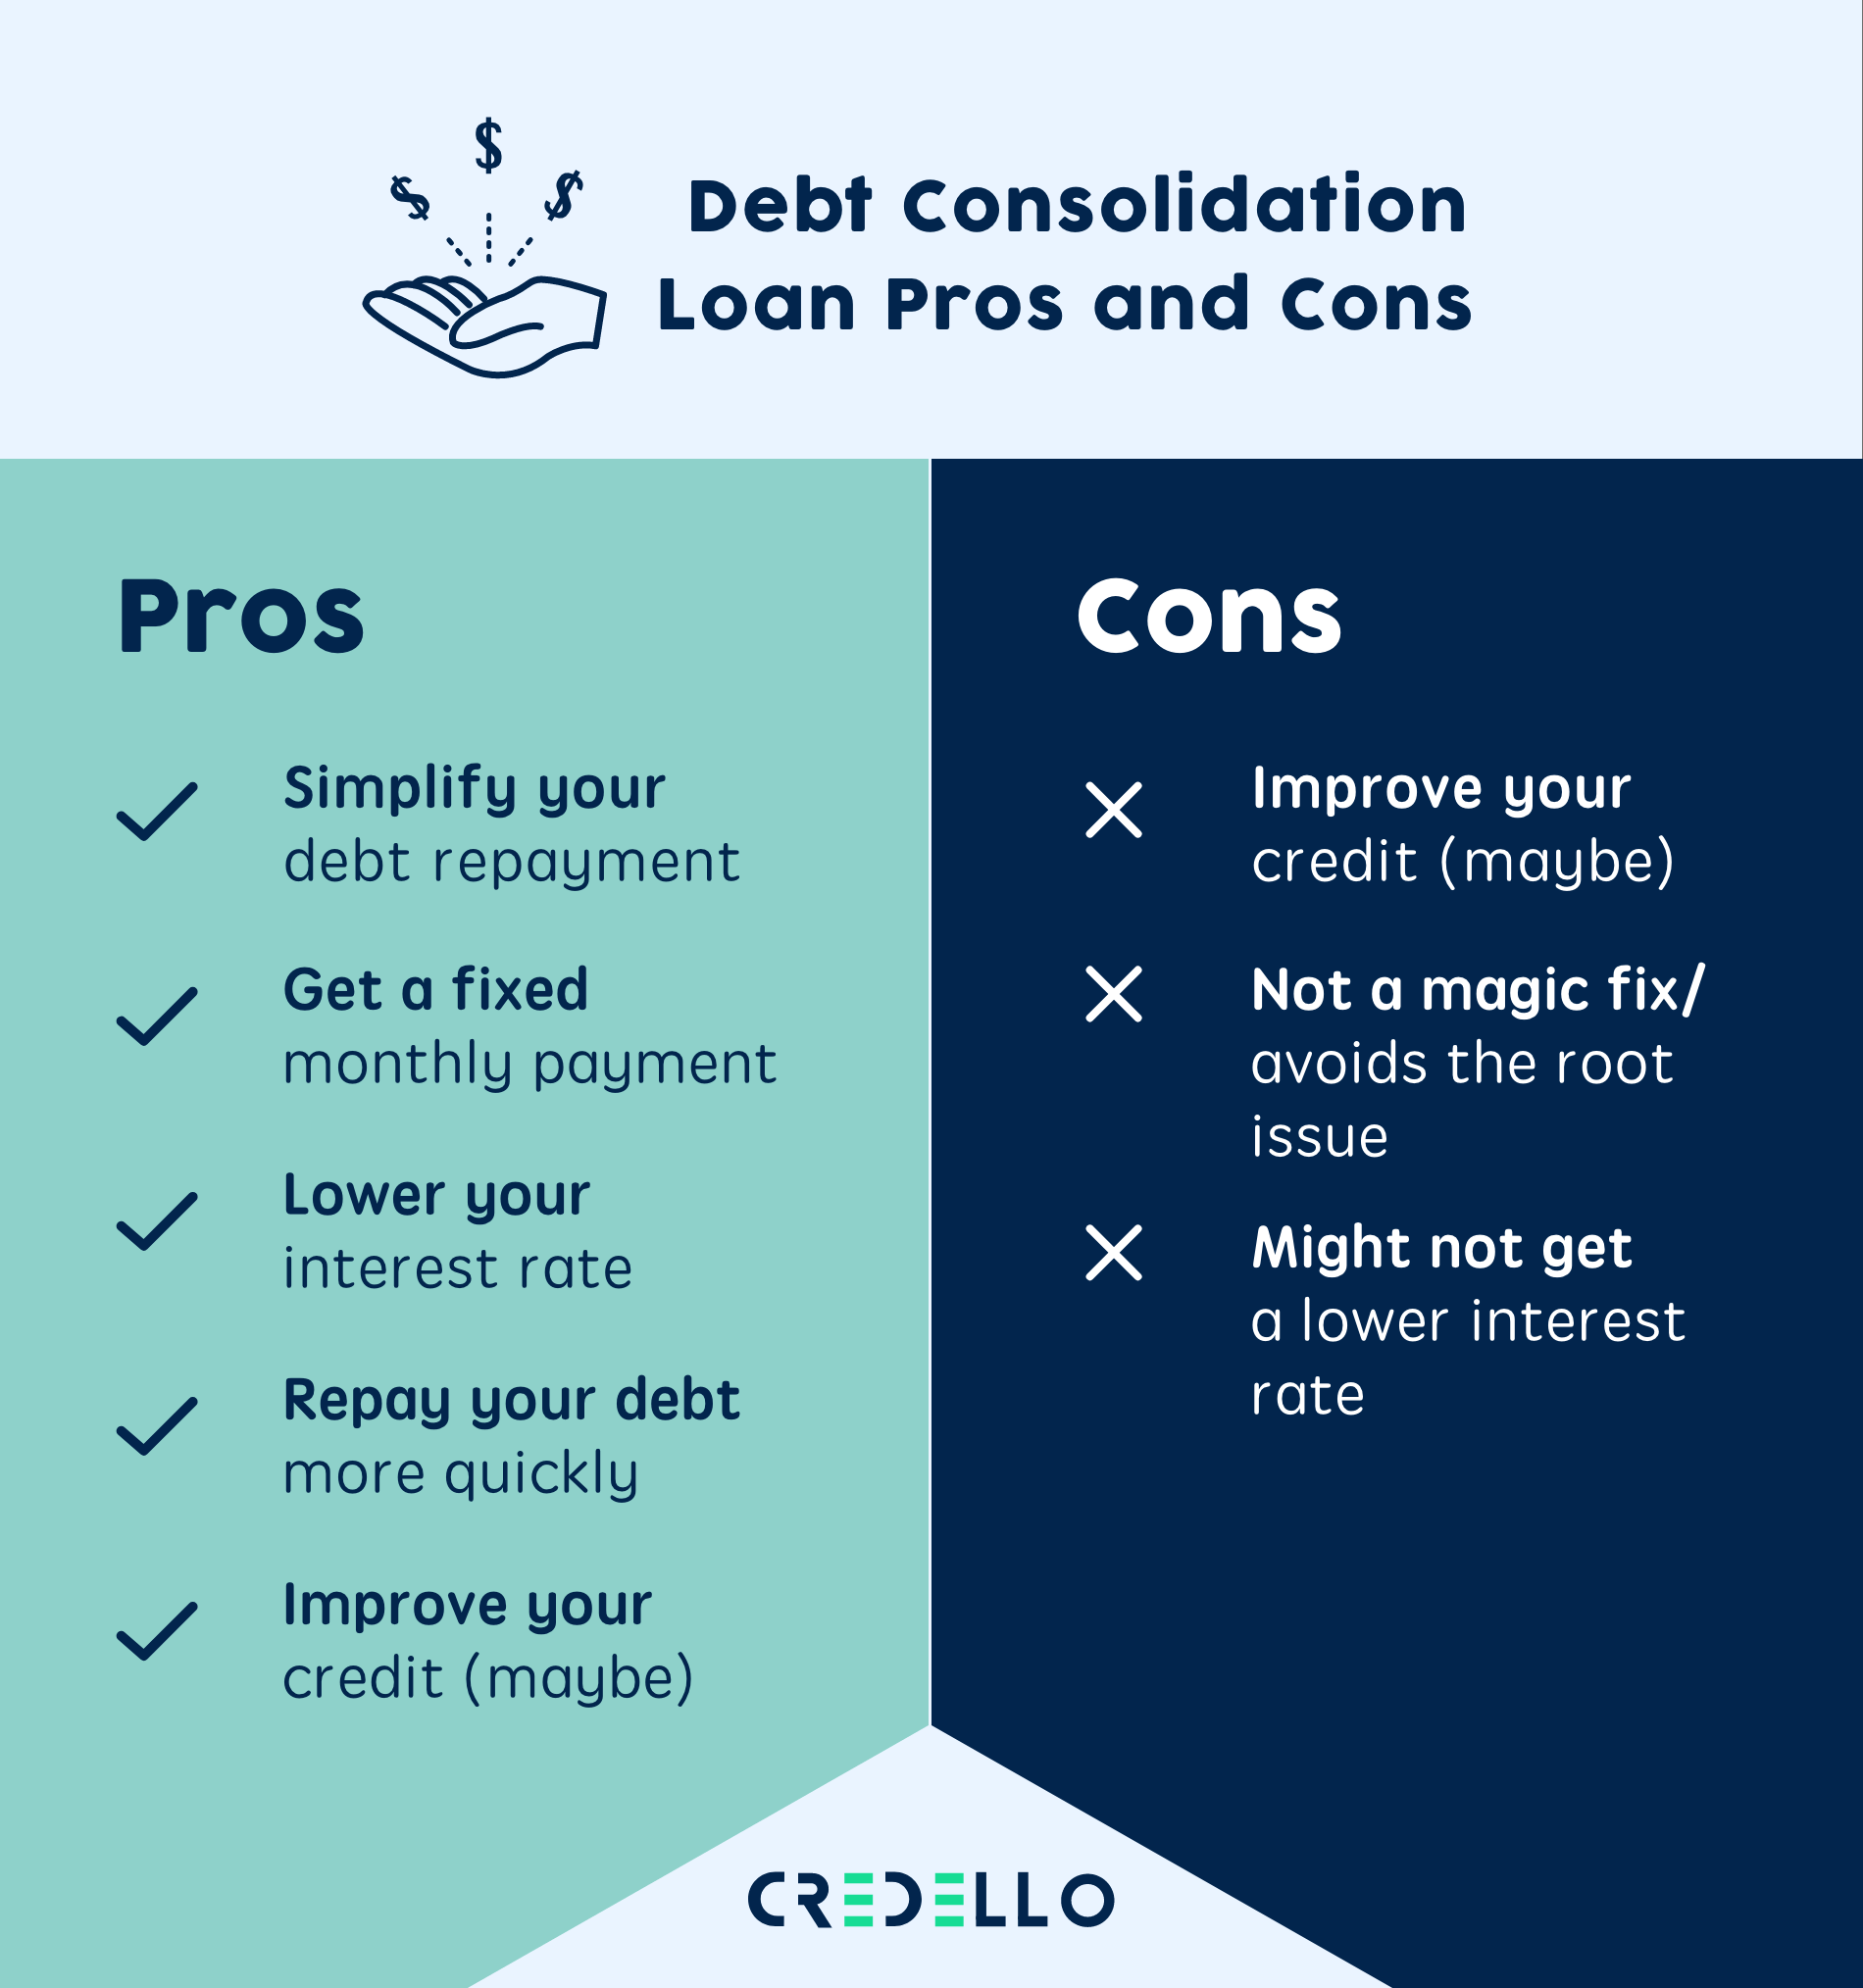 How Does Debt Consolidation “LOANS” Work?